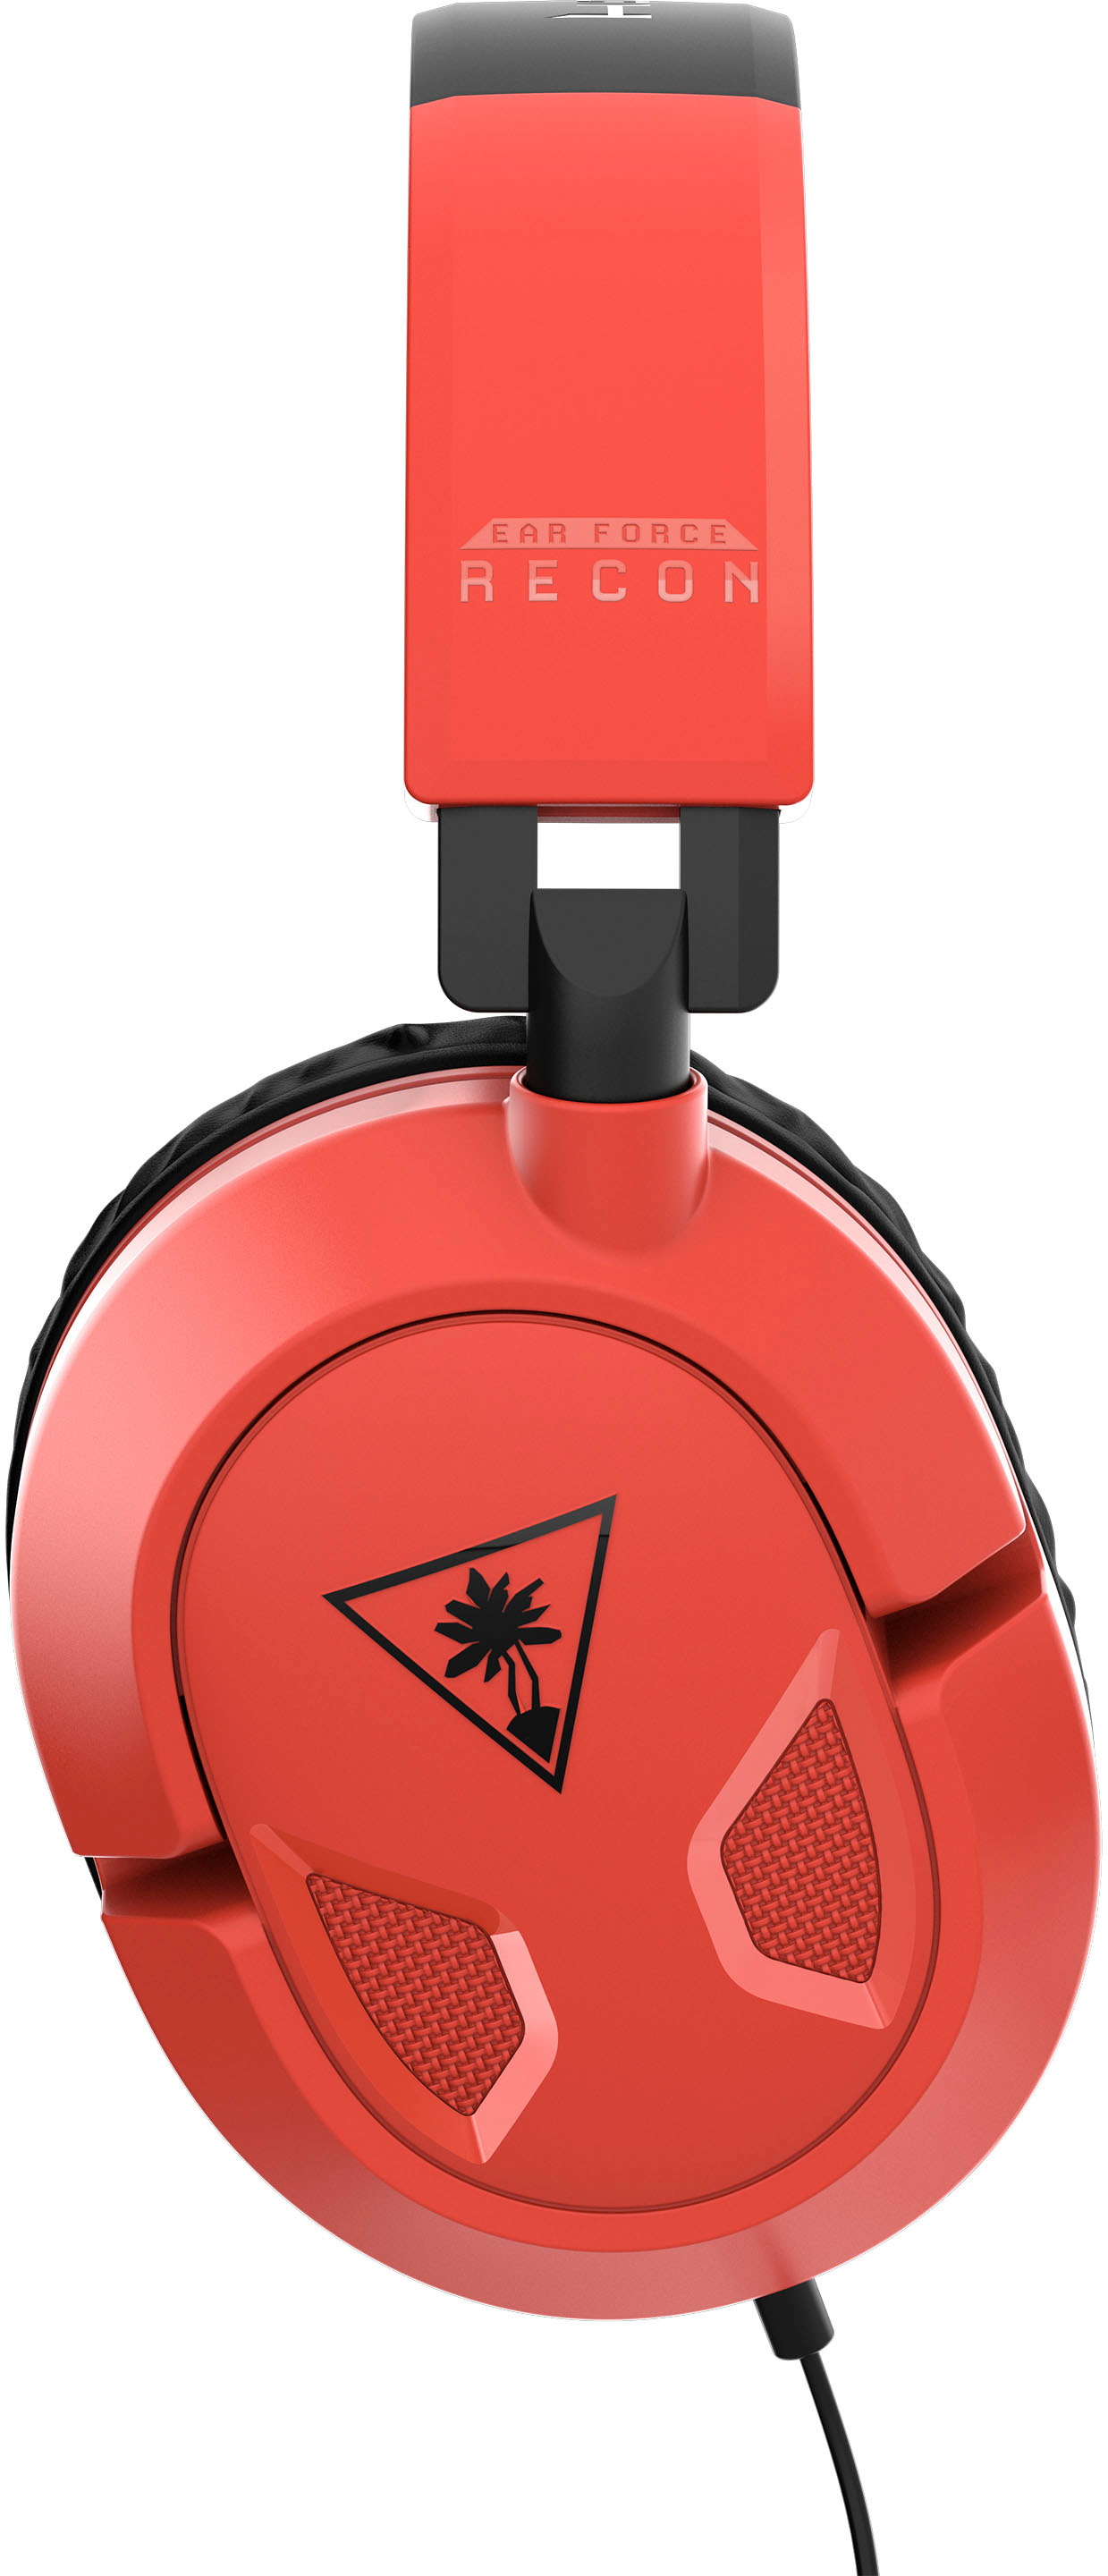 Turtle Beach Recon 50 Wired Switch TBS-8150-05 Red/Blue for Buy Gaming Best Nintendo Headset 